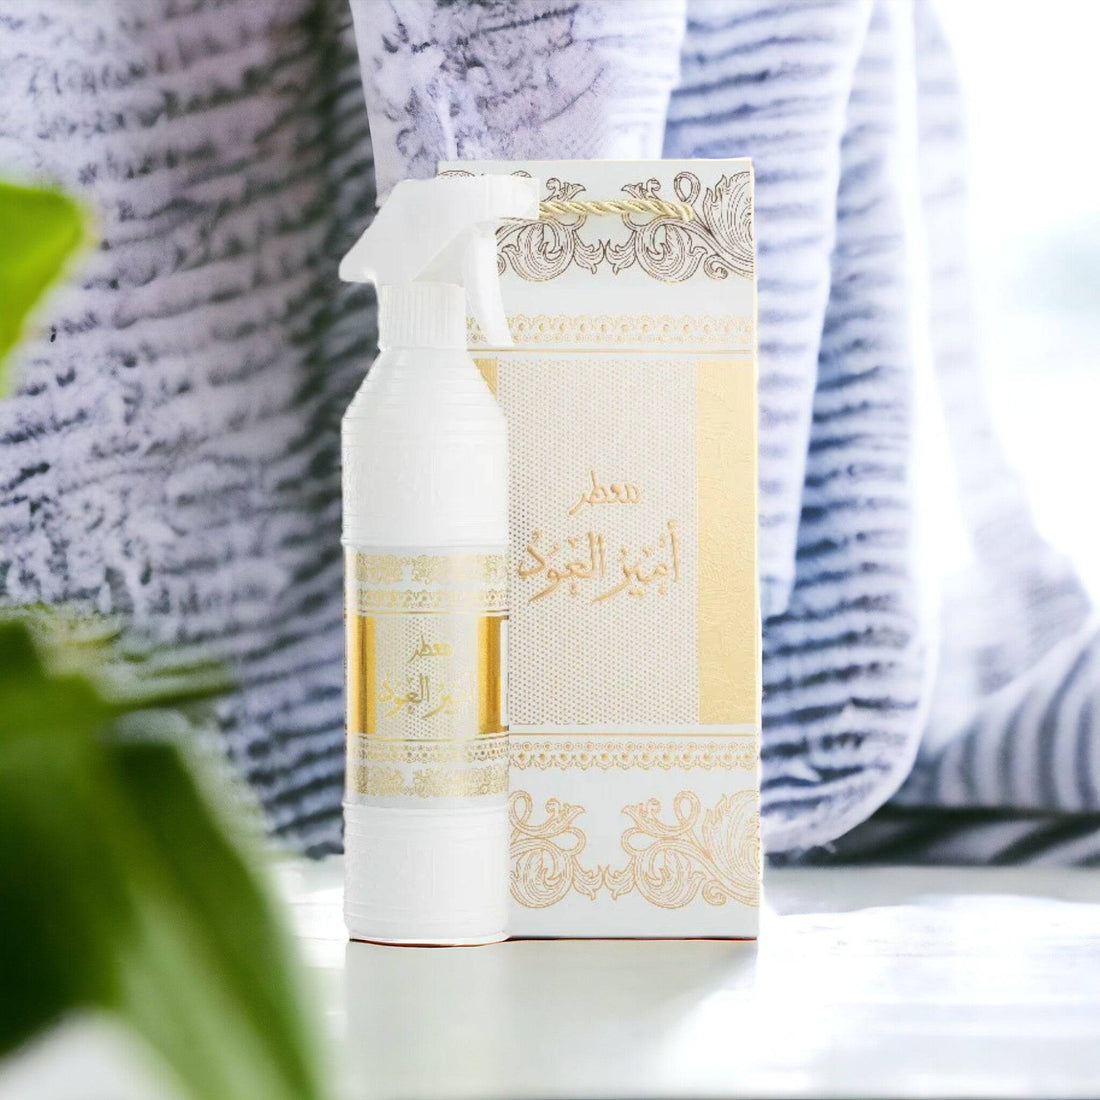 500 ml bottle of Ameer Al Oud Air Freshener, displaying its sleek design and highlighting its alcohol-free, oriental fragrance notes.